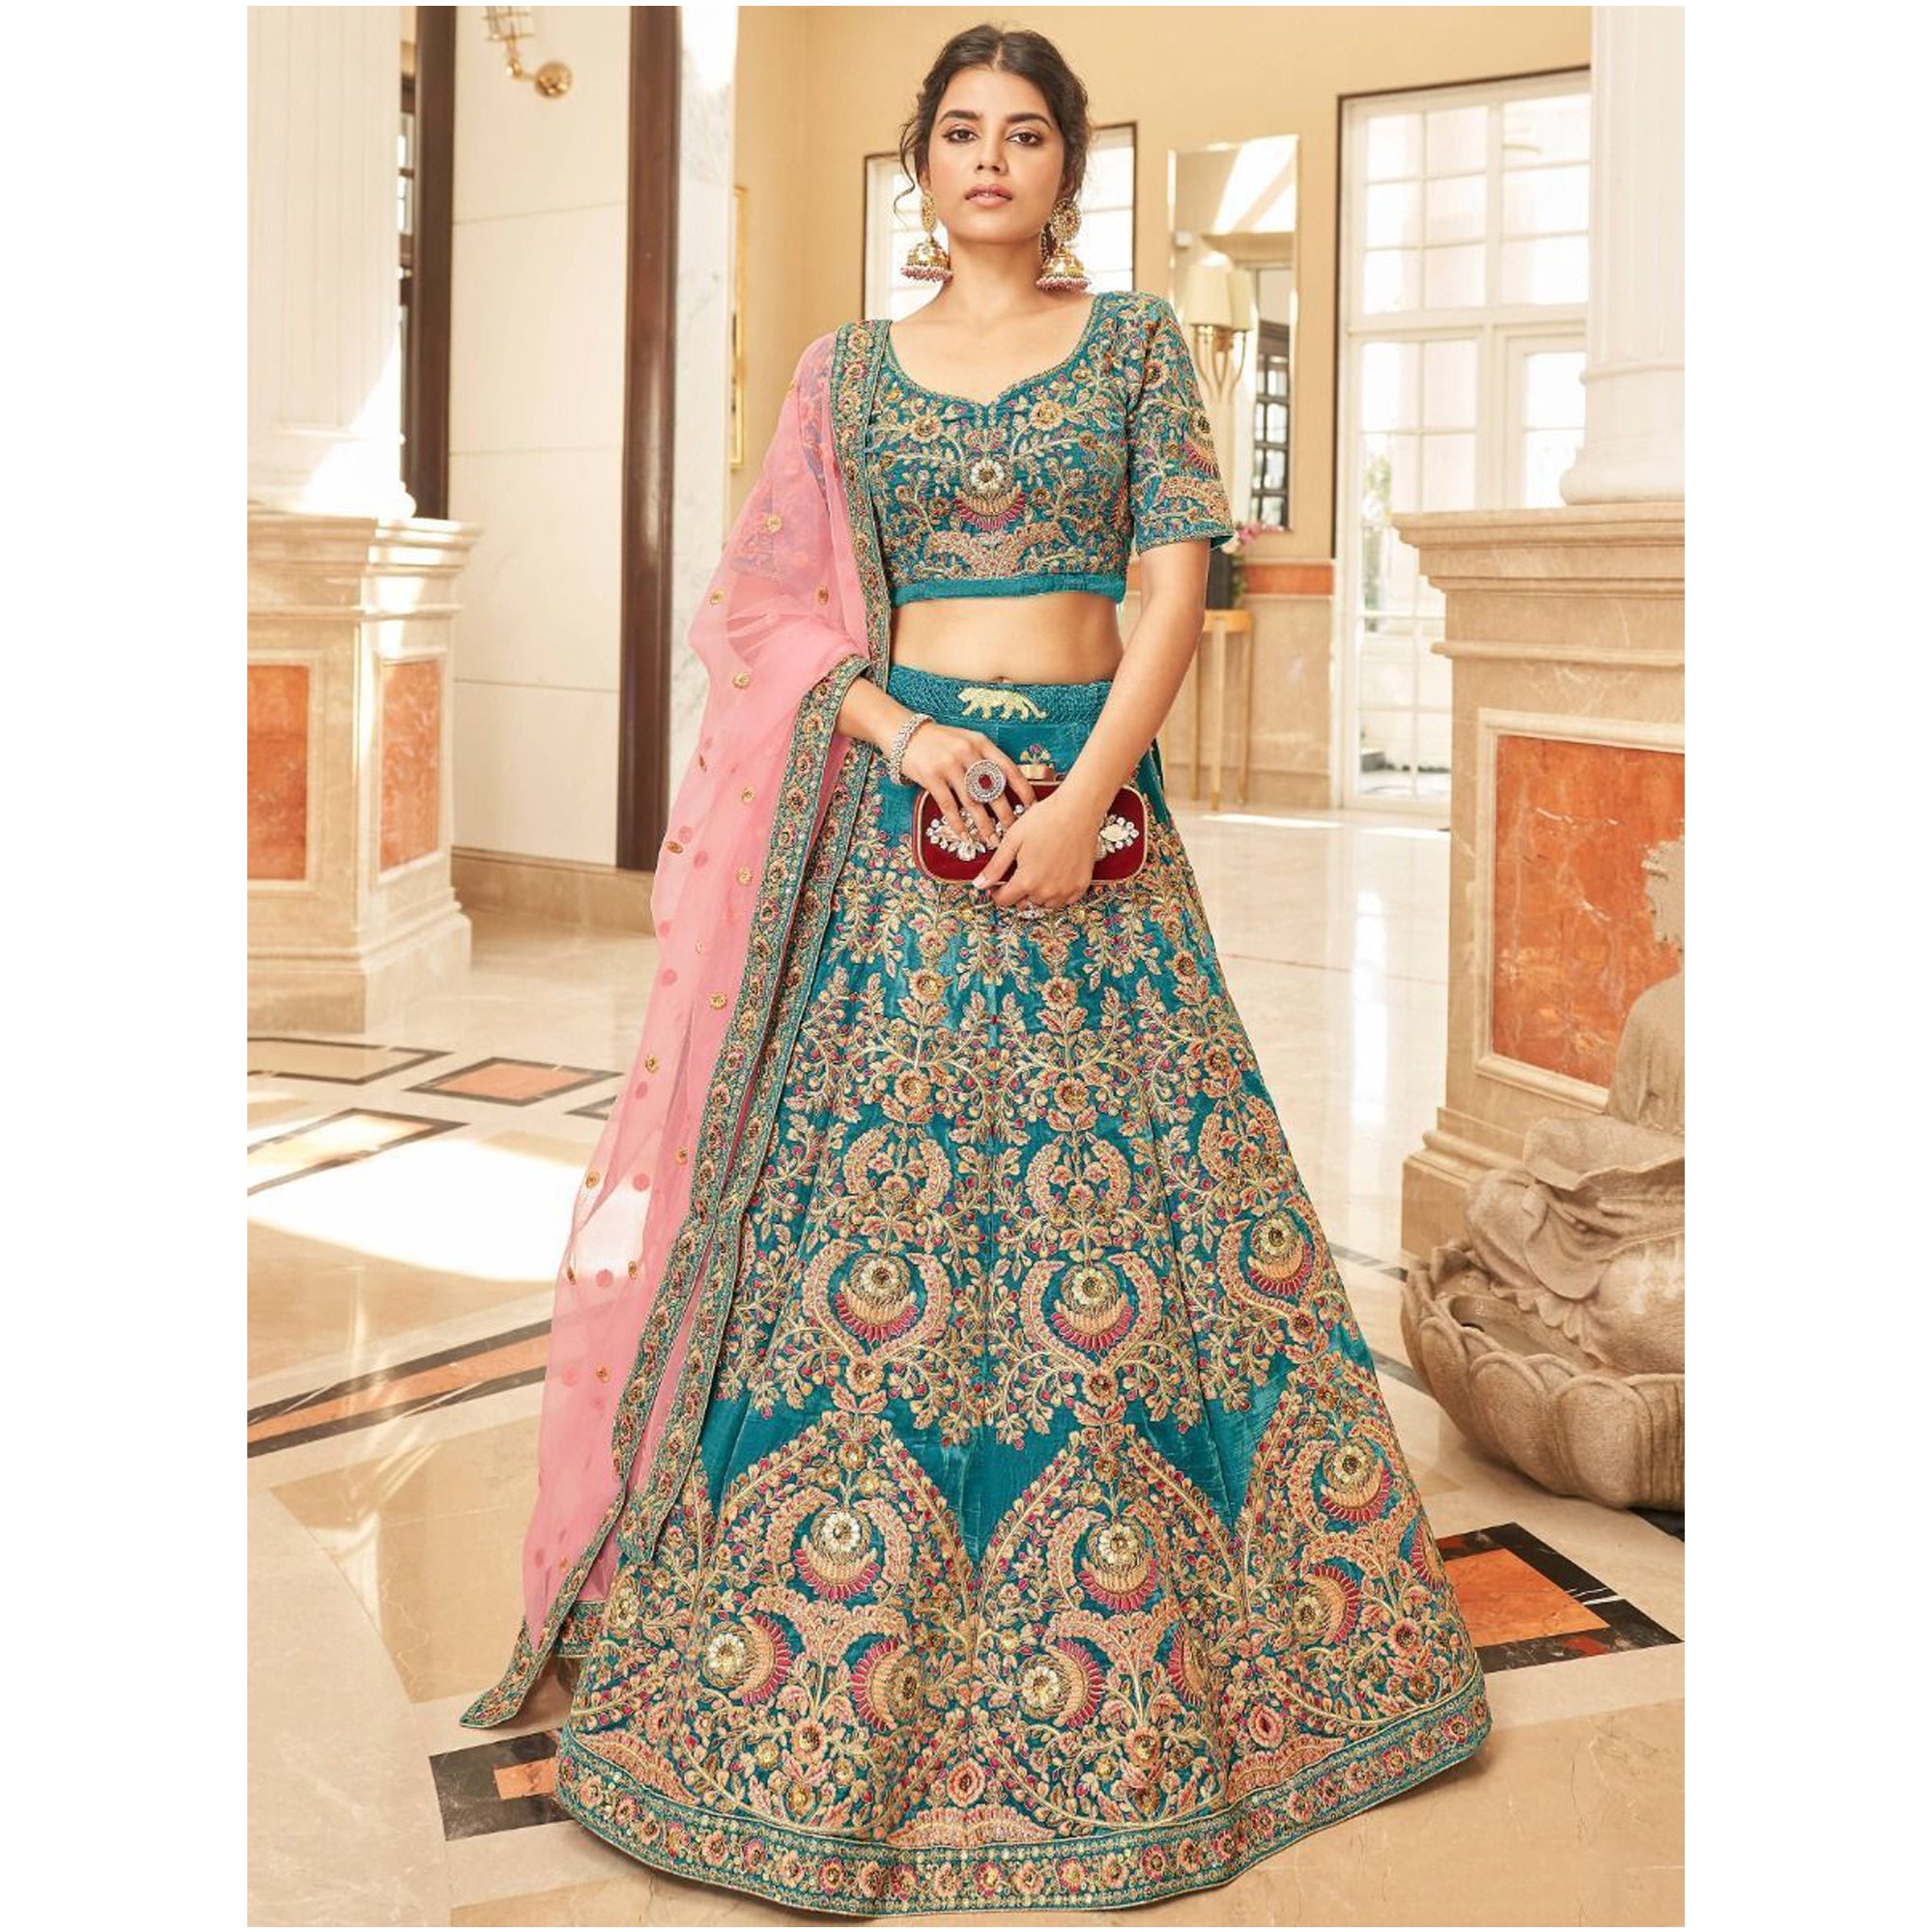 Georgeous Blue Color Embroidery Work Velvet Fabric Bridal Outfit Lehenga Choli With Pink Net Dupatta